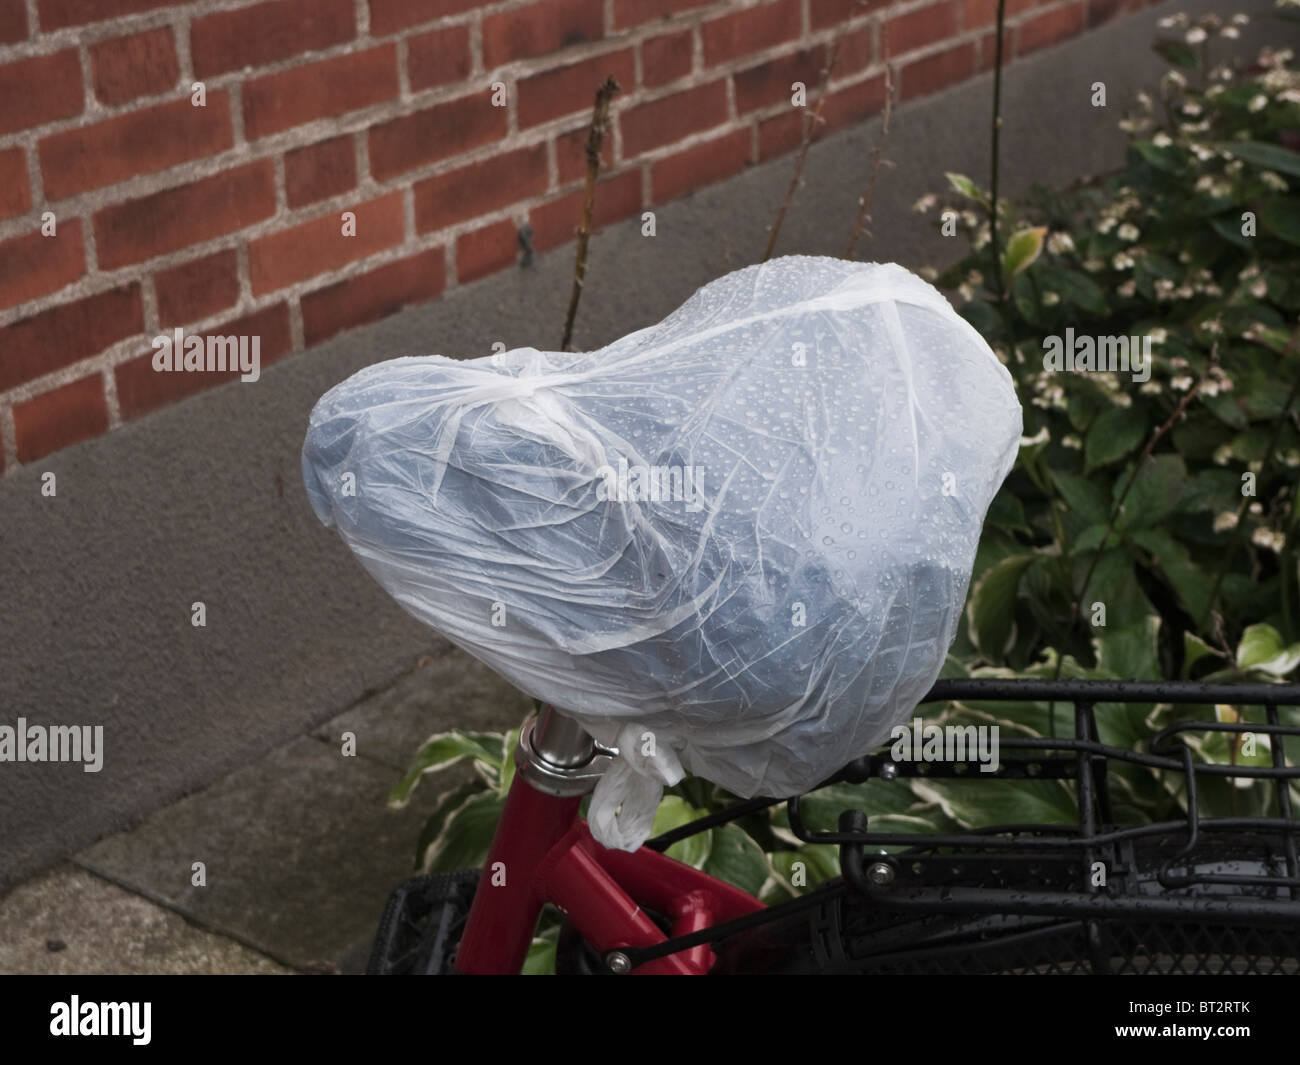 Bicycle saddle with a wet plastic bag over it. Stock Photo